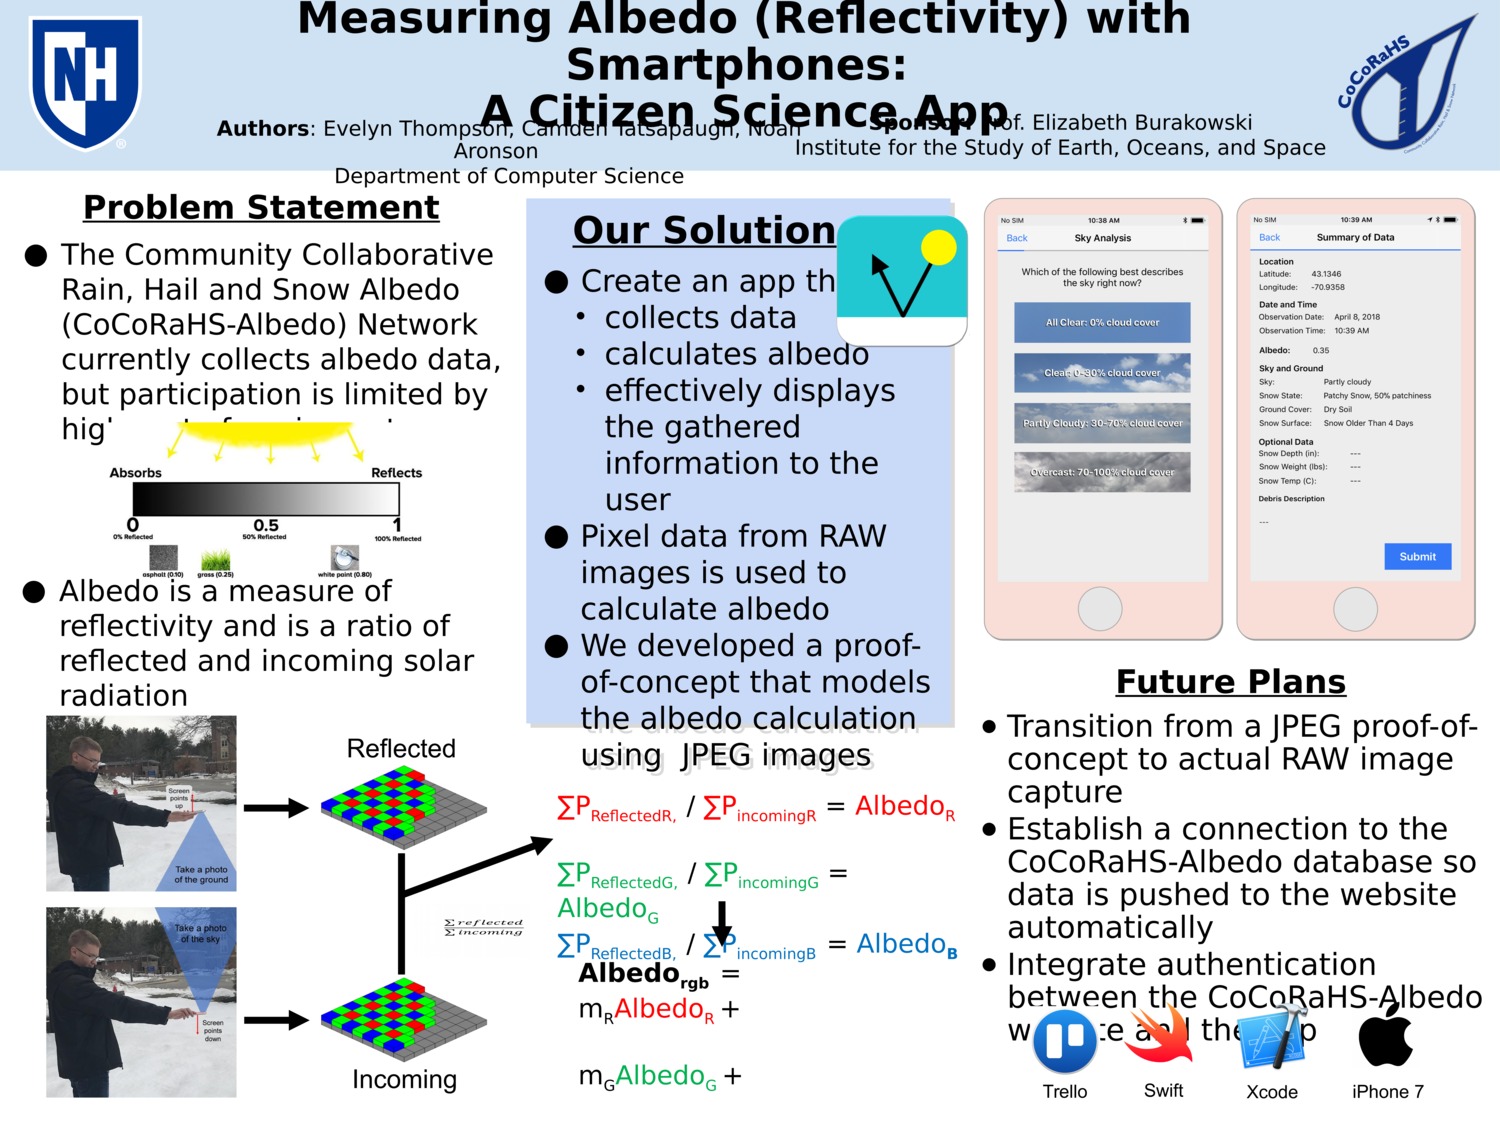 Measuring Albedo (Reflectivity) With Smartphones: A Citizen Science App by crt2004